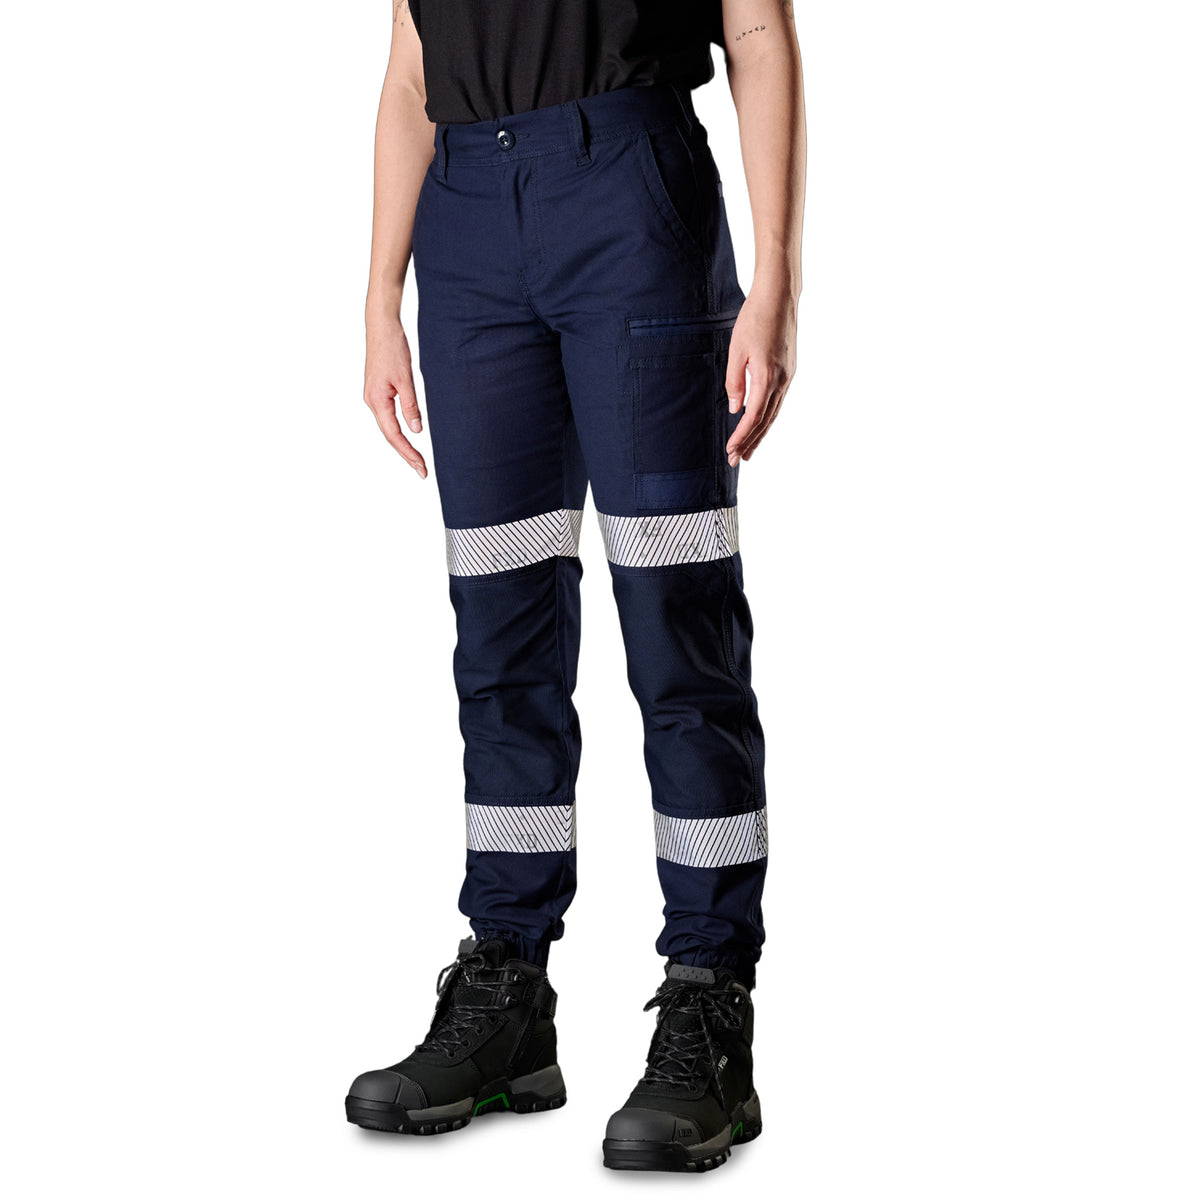 Work Pants for Women  Tradies Workwear & Safety